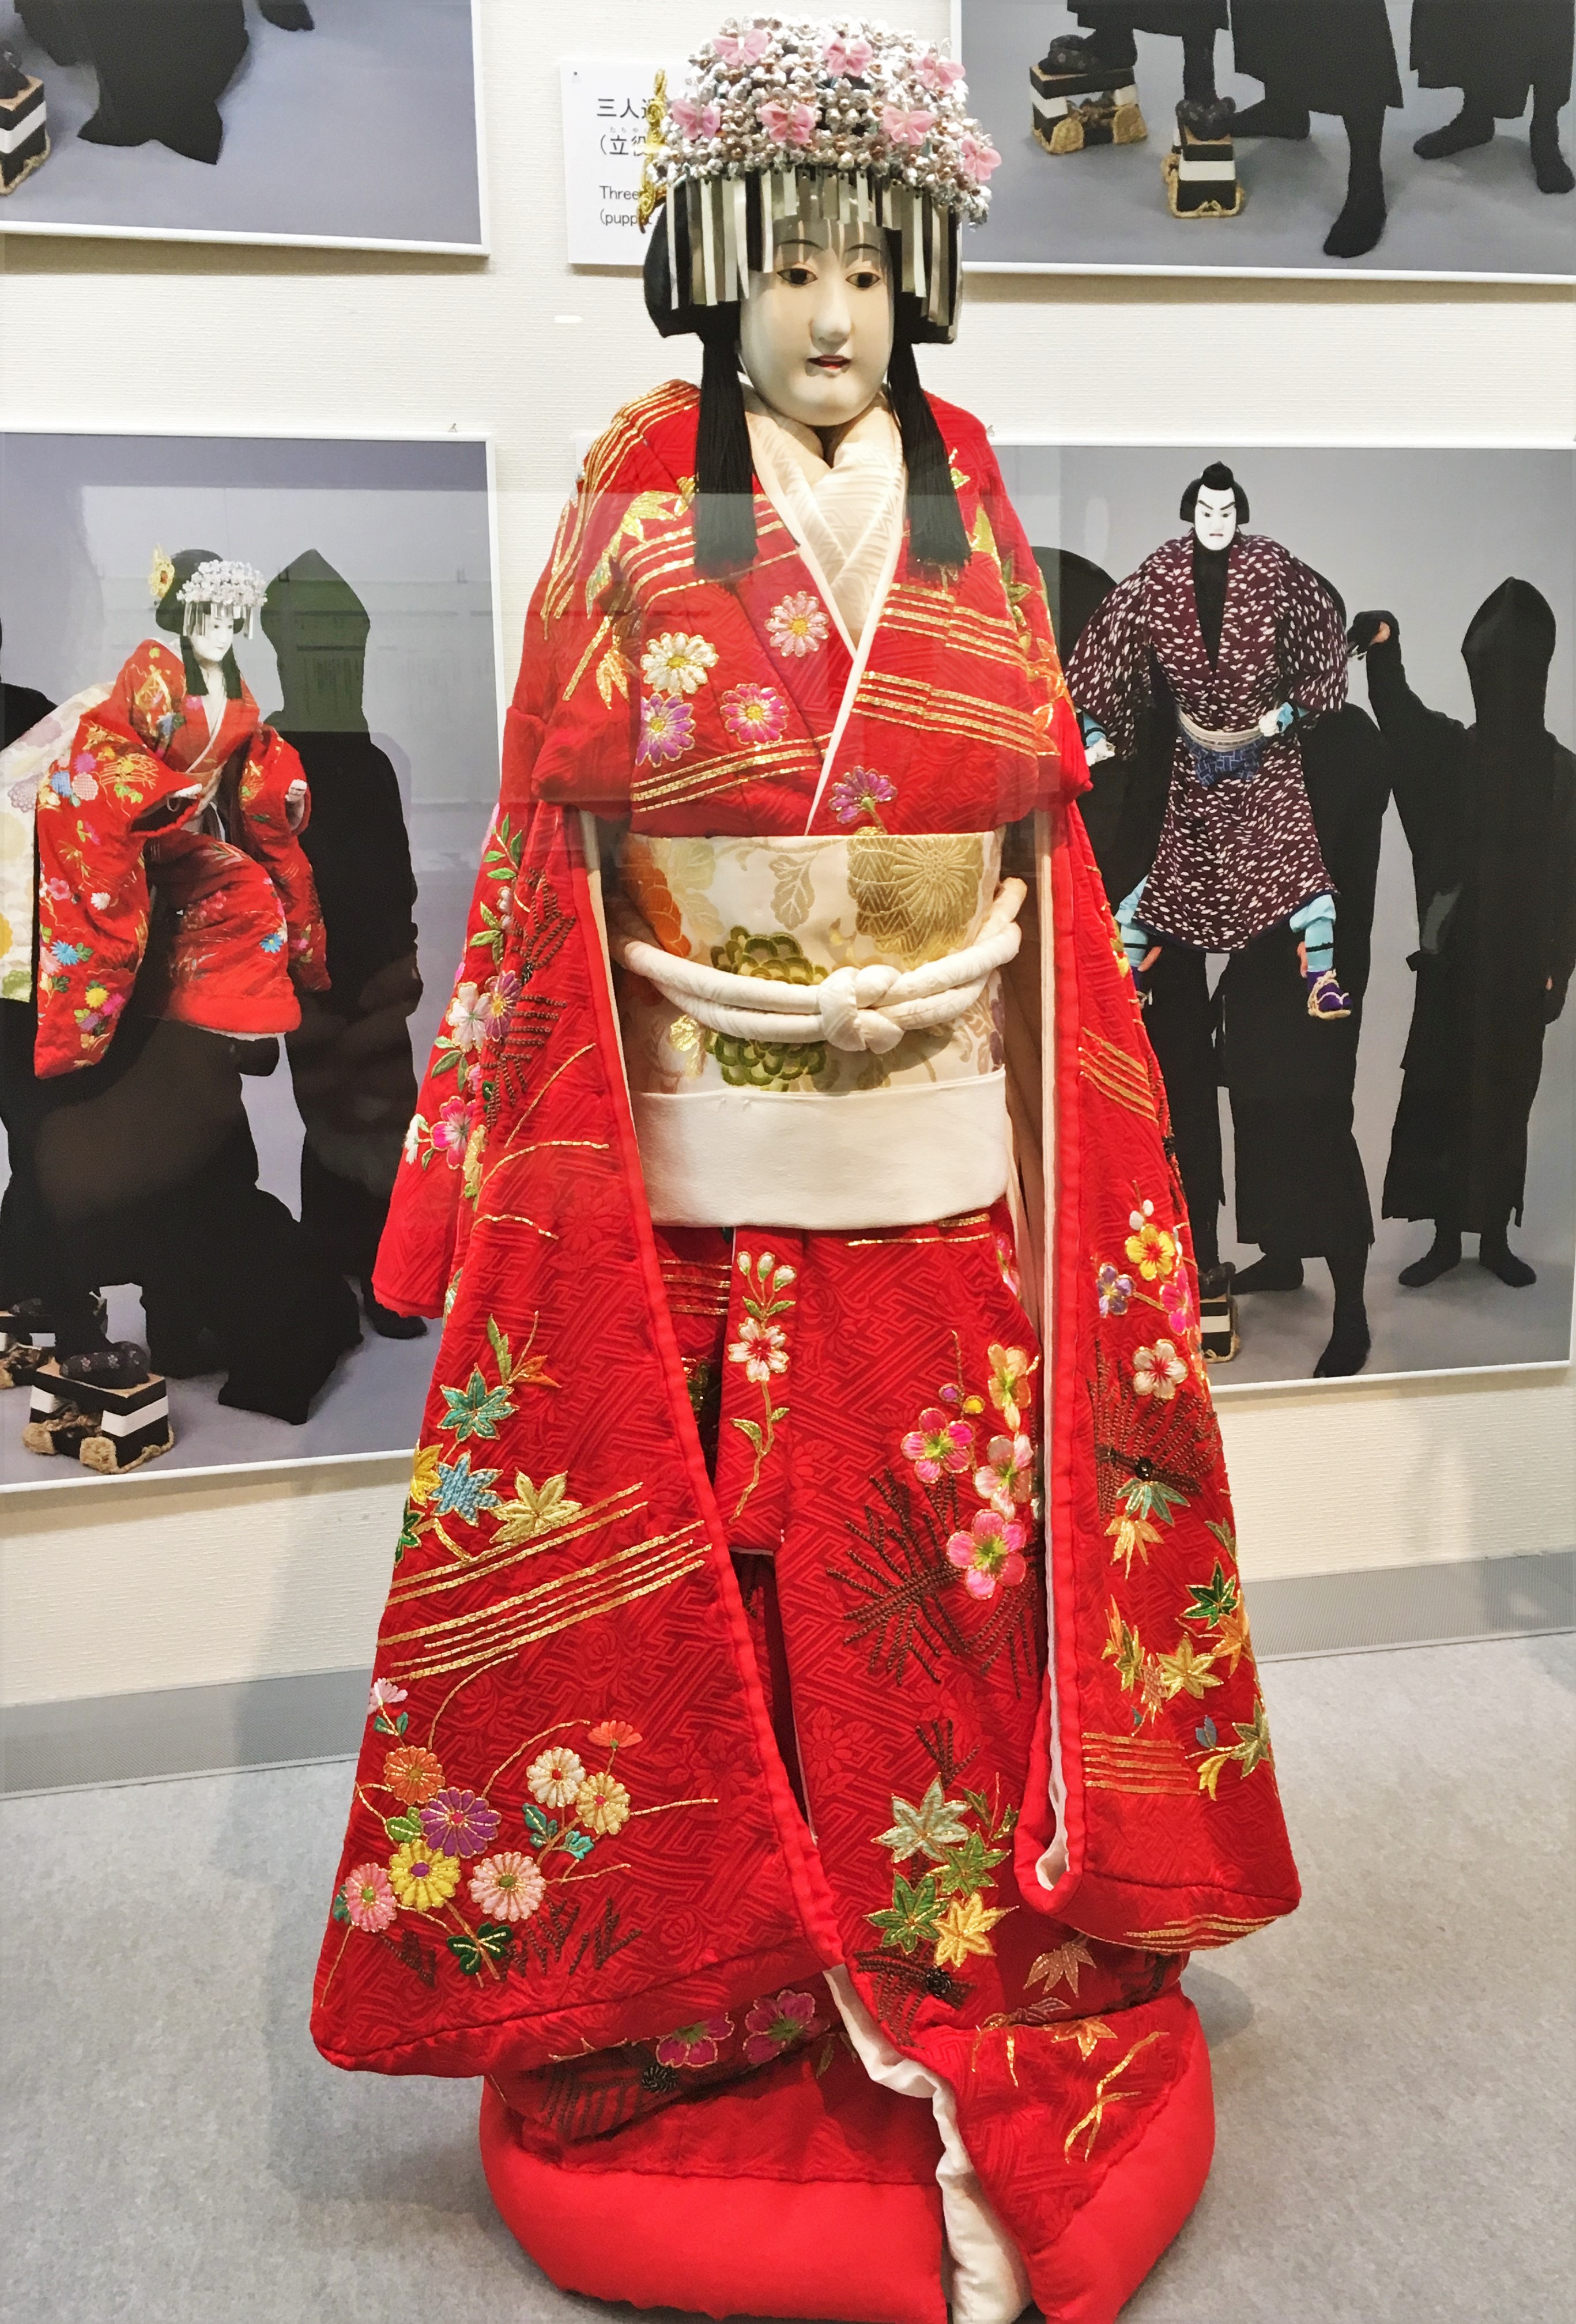 bunraku puppet dressed in a chrerry blossom and silver head dress and a red kimono